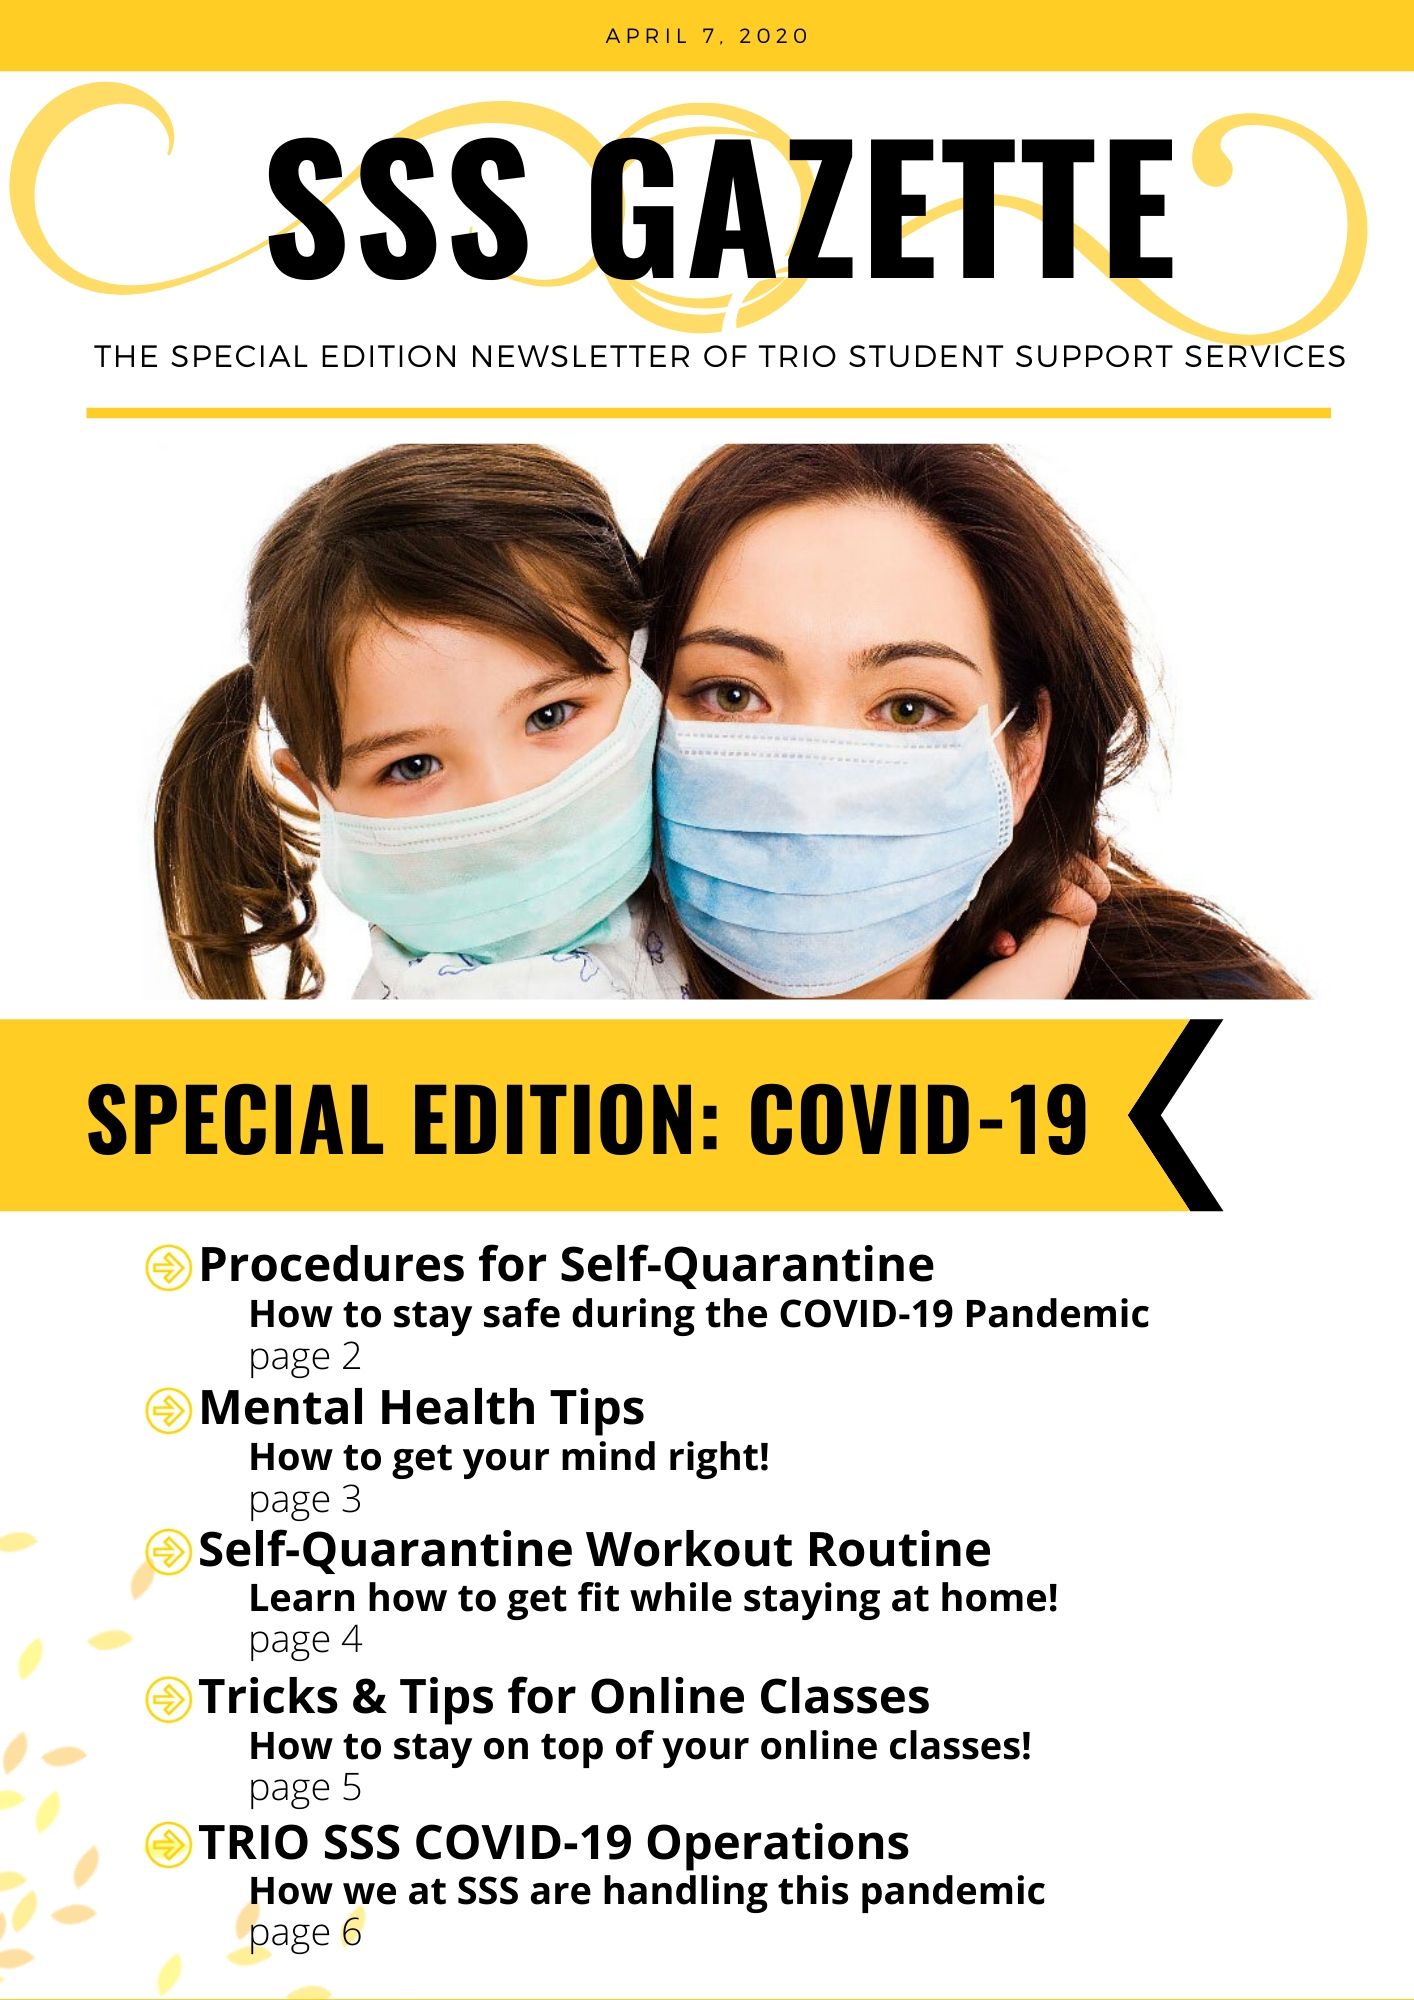 SSS Gazette: The special edition newsletter of TRIO Student Support Services; SPECIAL EDITION: COVID-19 Includes: Procedures for Self-Quarantine: How to stay safe during the COVID-19 Pandemic, Mental Health Tips: How to get you mind right!, Self-Quarantine Workout Routine: Learn how to get fit while staying at home!, Tips and tricks for online classes: How to stay on top of your online classes!, TRIO SSS COVID-19 Operations: How we at SSS are handling this pandemic